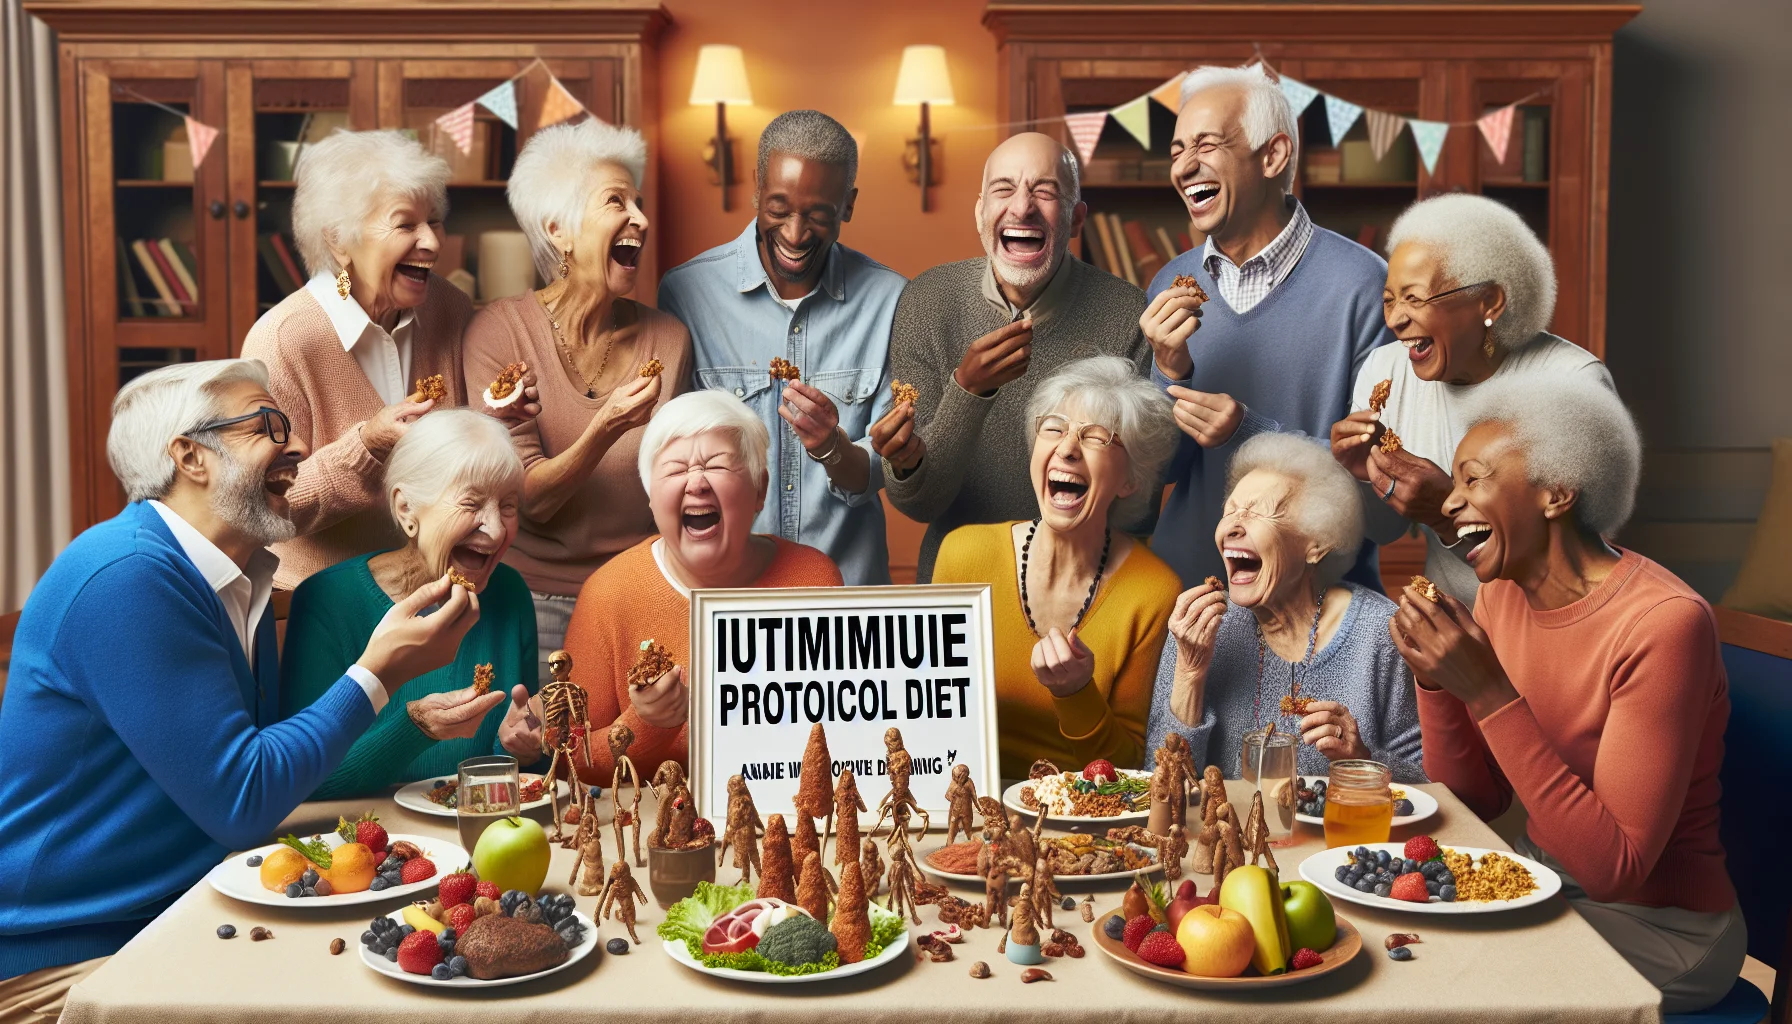 Imagine an amusing real-world scene related to the autoimmune protocol diet in an elderly setting. There's a lively group of senior citizens from varied descents: Caucasian, Hispanic, Middle Eastern, South Asian and Black. They are all gathered around a table engulfed with healthy delicacies prominent in the autoimmune protocol diet recommended by the Mayo Clinic. Each person is chuckling or chuckling at their own quirky attempts to use new-fangled dietary gadgets to prepare their meals. The background is set in a warmly lit, cozy senior center and everyone is exuding joy, showcasing that healthy eating isn't a chore but can be quite enjoyable.